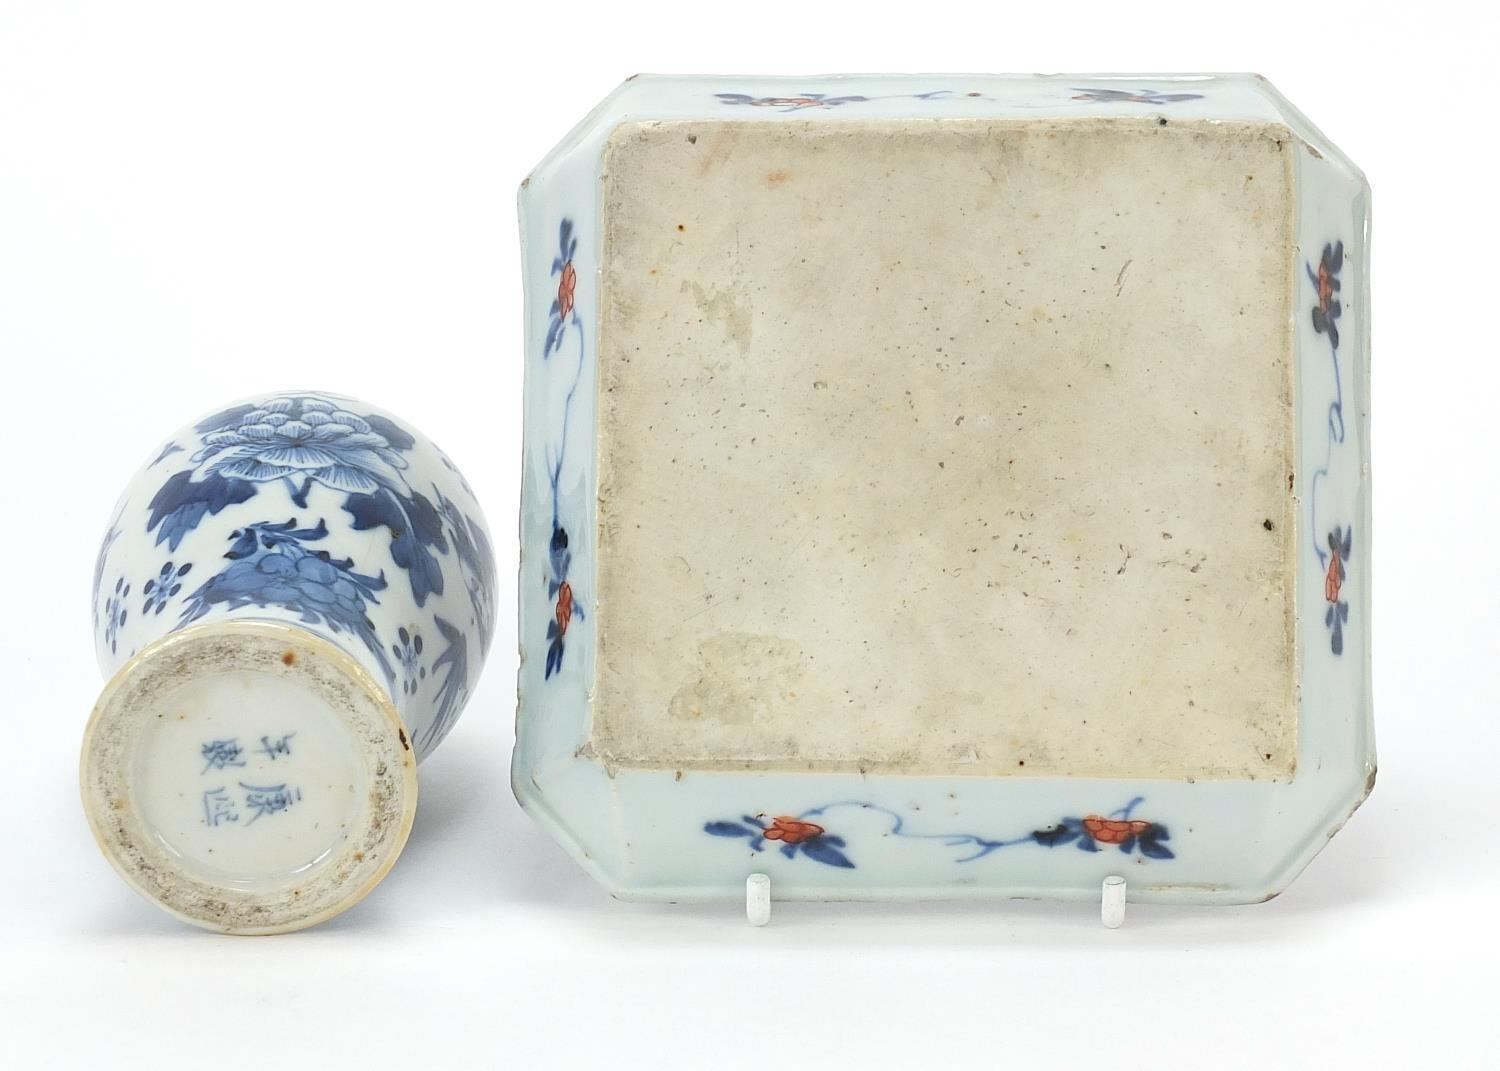 Chinese blue and white porcelain baluster vase and a square dish hand painted in the Imari palette - Image 7 of 8